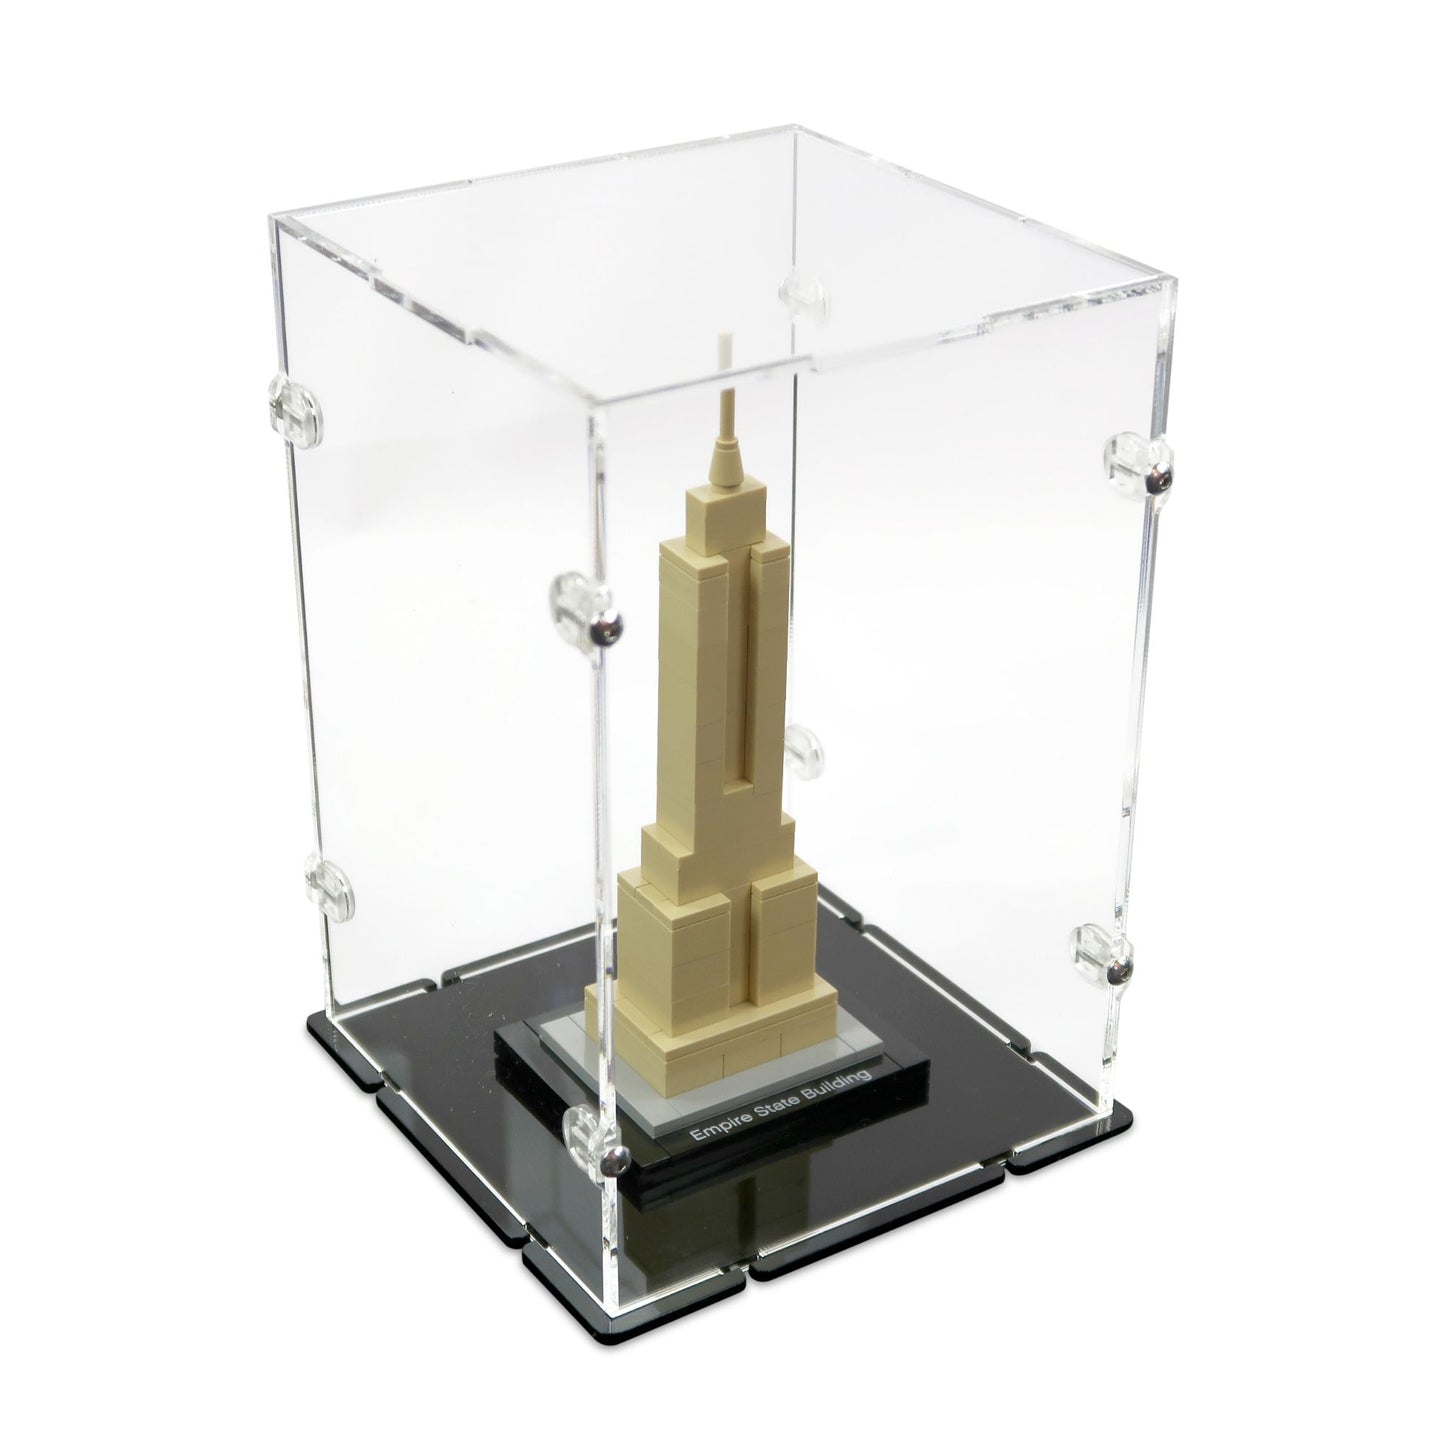 21002 Empire State Building Display Case